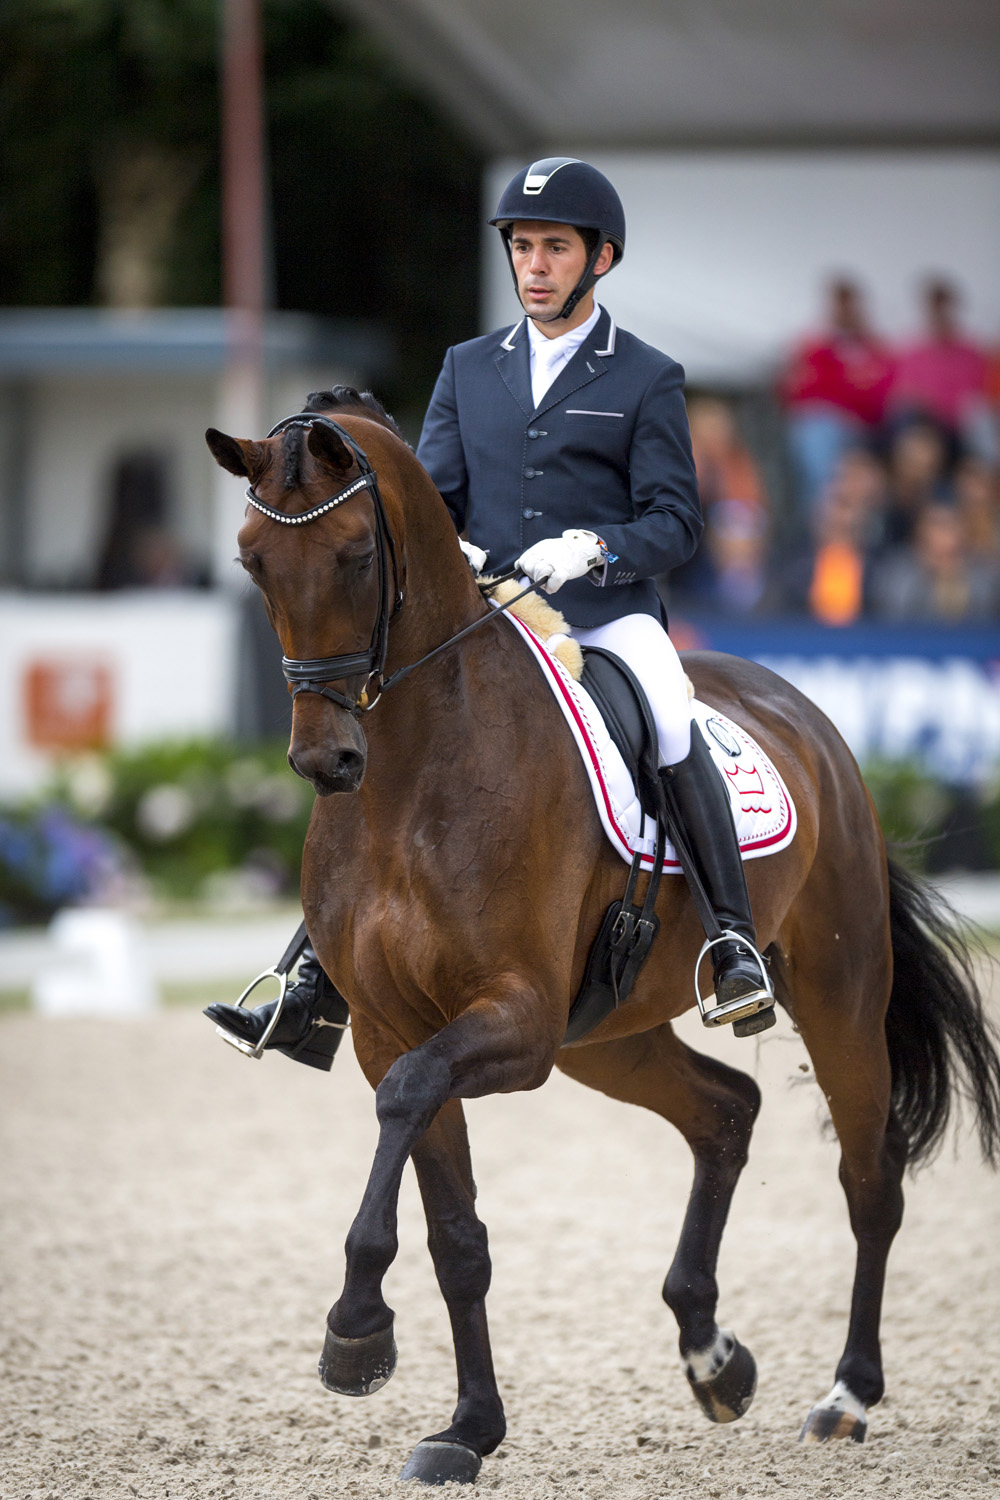 The fabulous mare, Fiontini, who was 5-year-old champion in 2015, returned to claim the 6-year-old title at the Longines FEI/WBFSH World Breeding Championships for Young Horses 2016 at Ermelo (NED). Photo by FEI/Arnd Bronkhorst